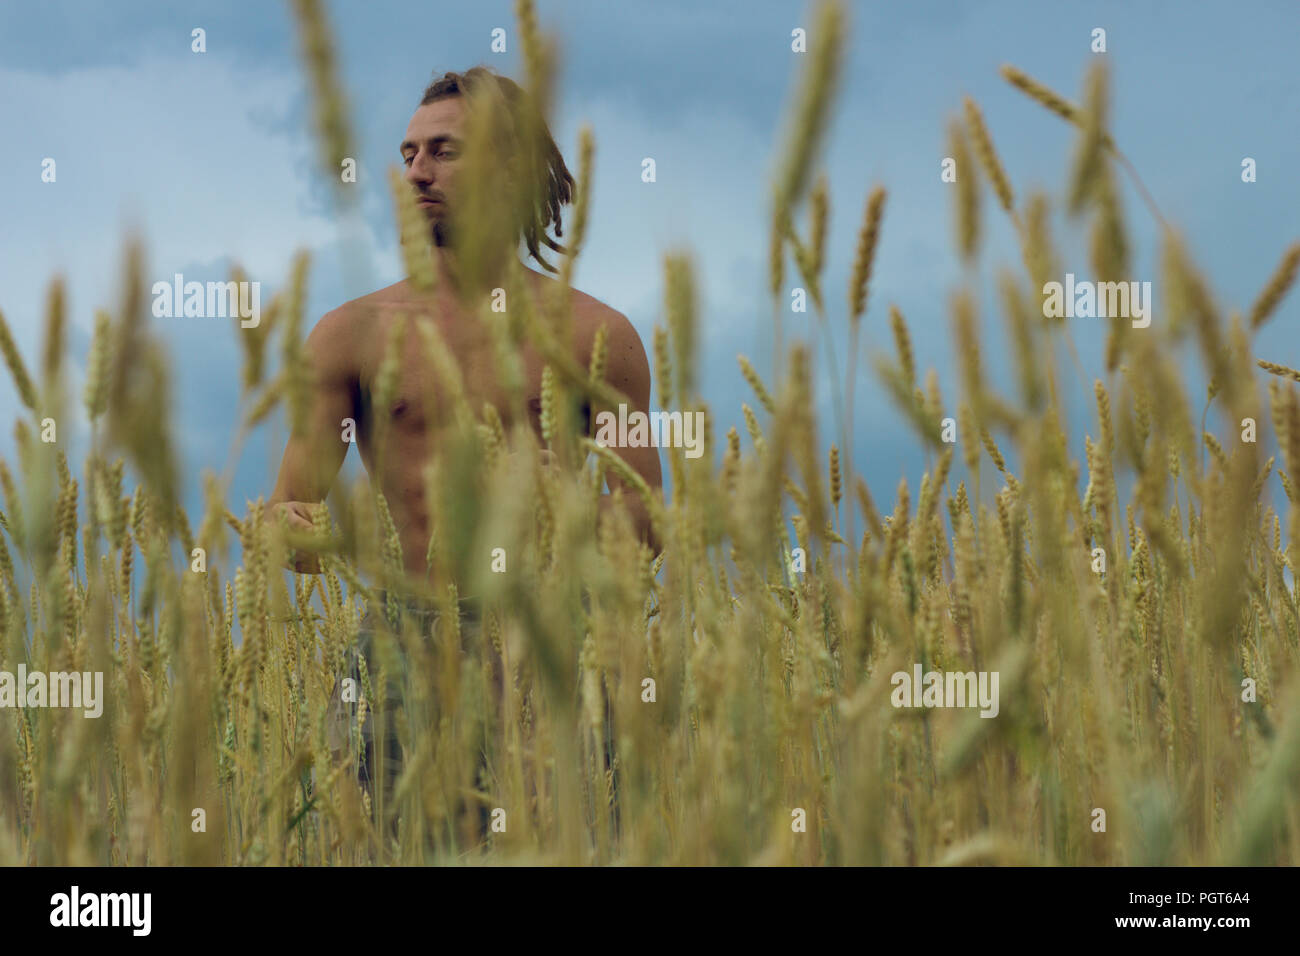 Man in wheat field, human in nature with summer sun, grass and plants Stock Photo